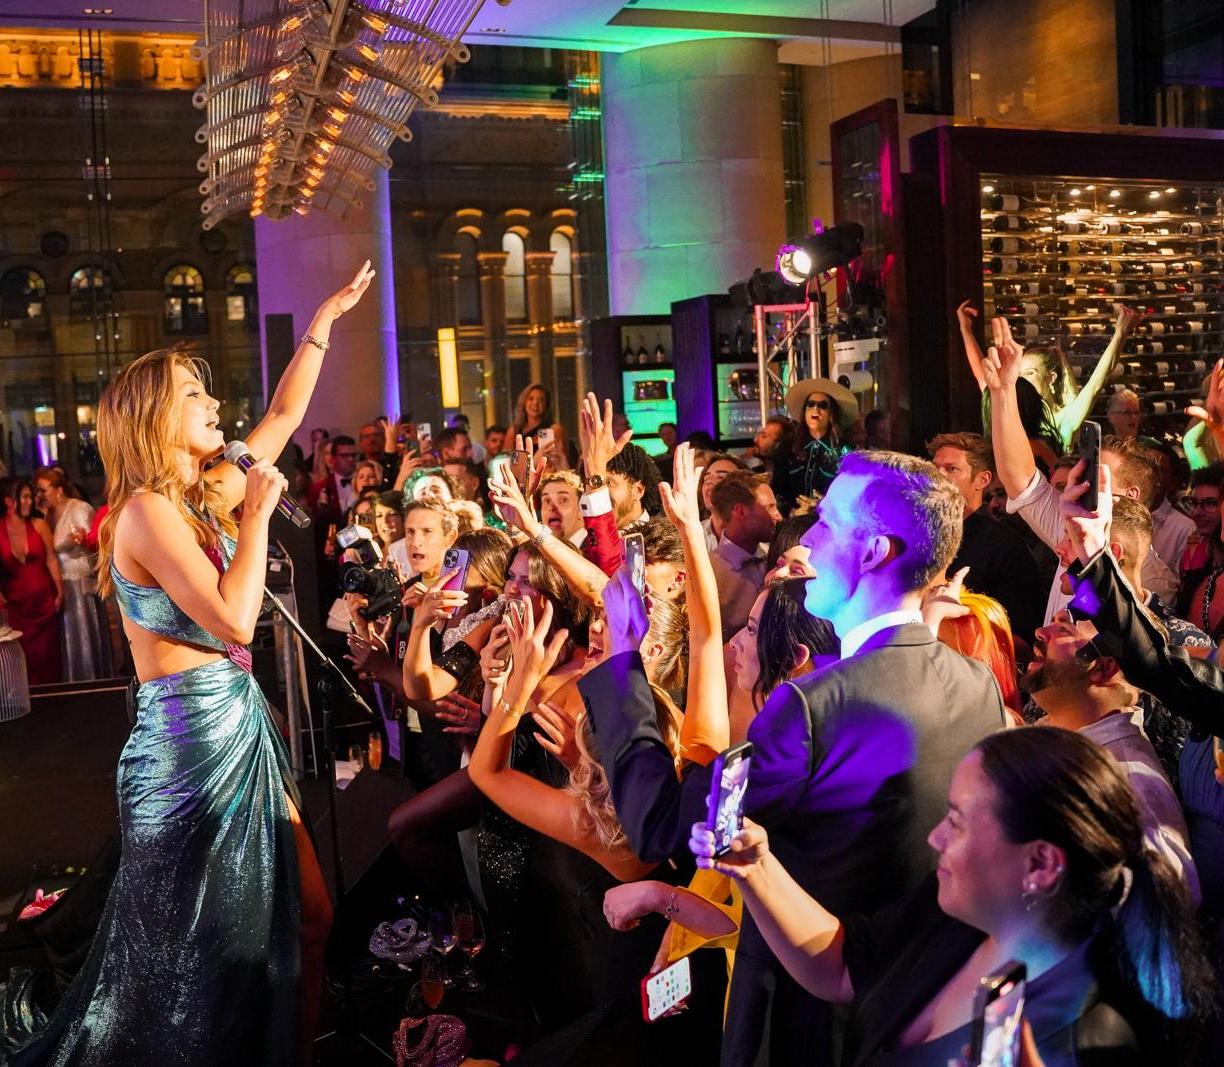 Delta Goodrem performs at Hilton and Minus18’s Rainbow Formal launch, where a star-studded crowd came together to support LGBTQIA+ young people’s right to inclusive spaces across Australia